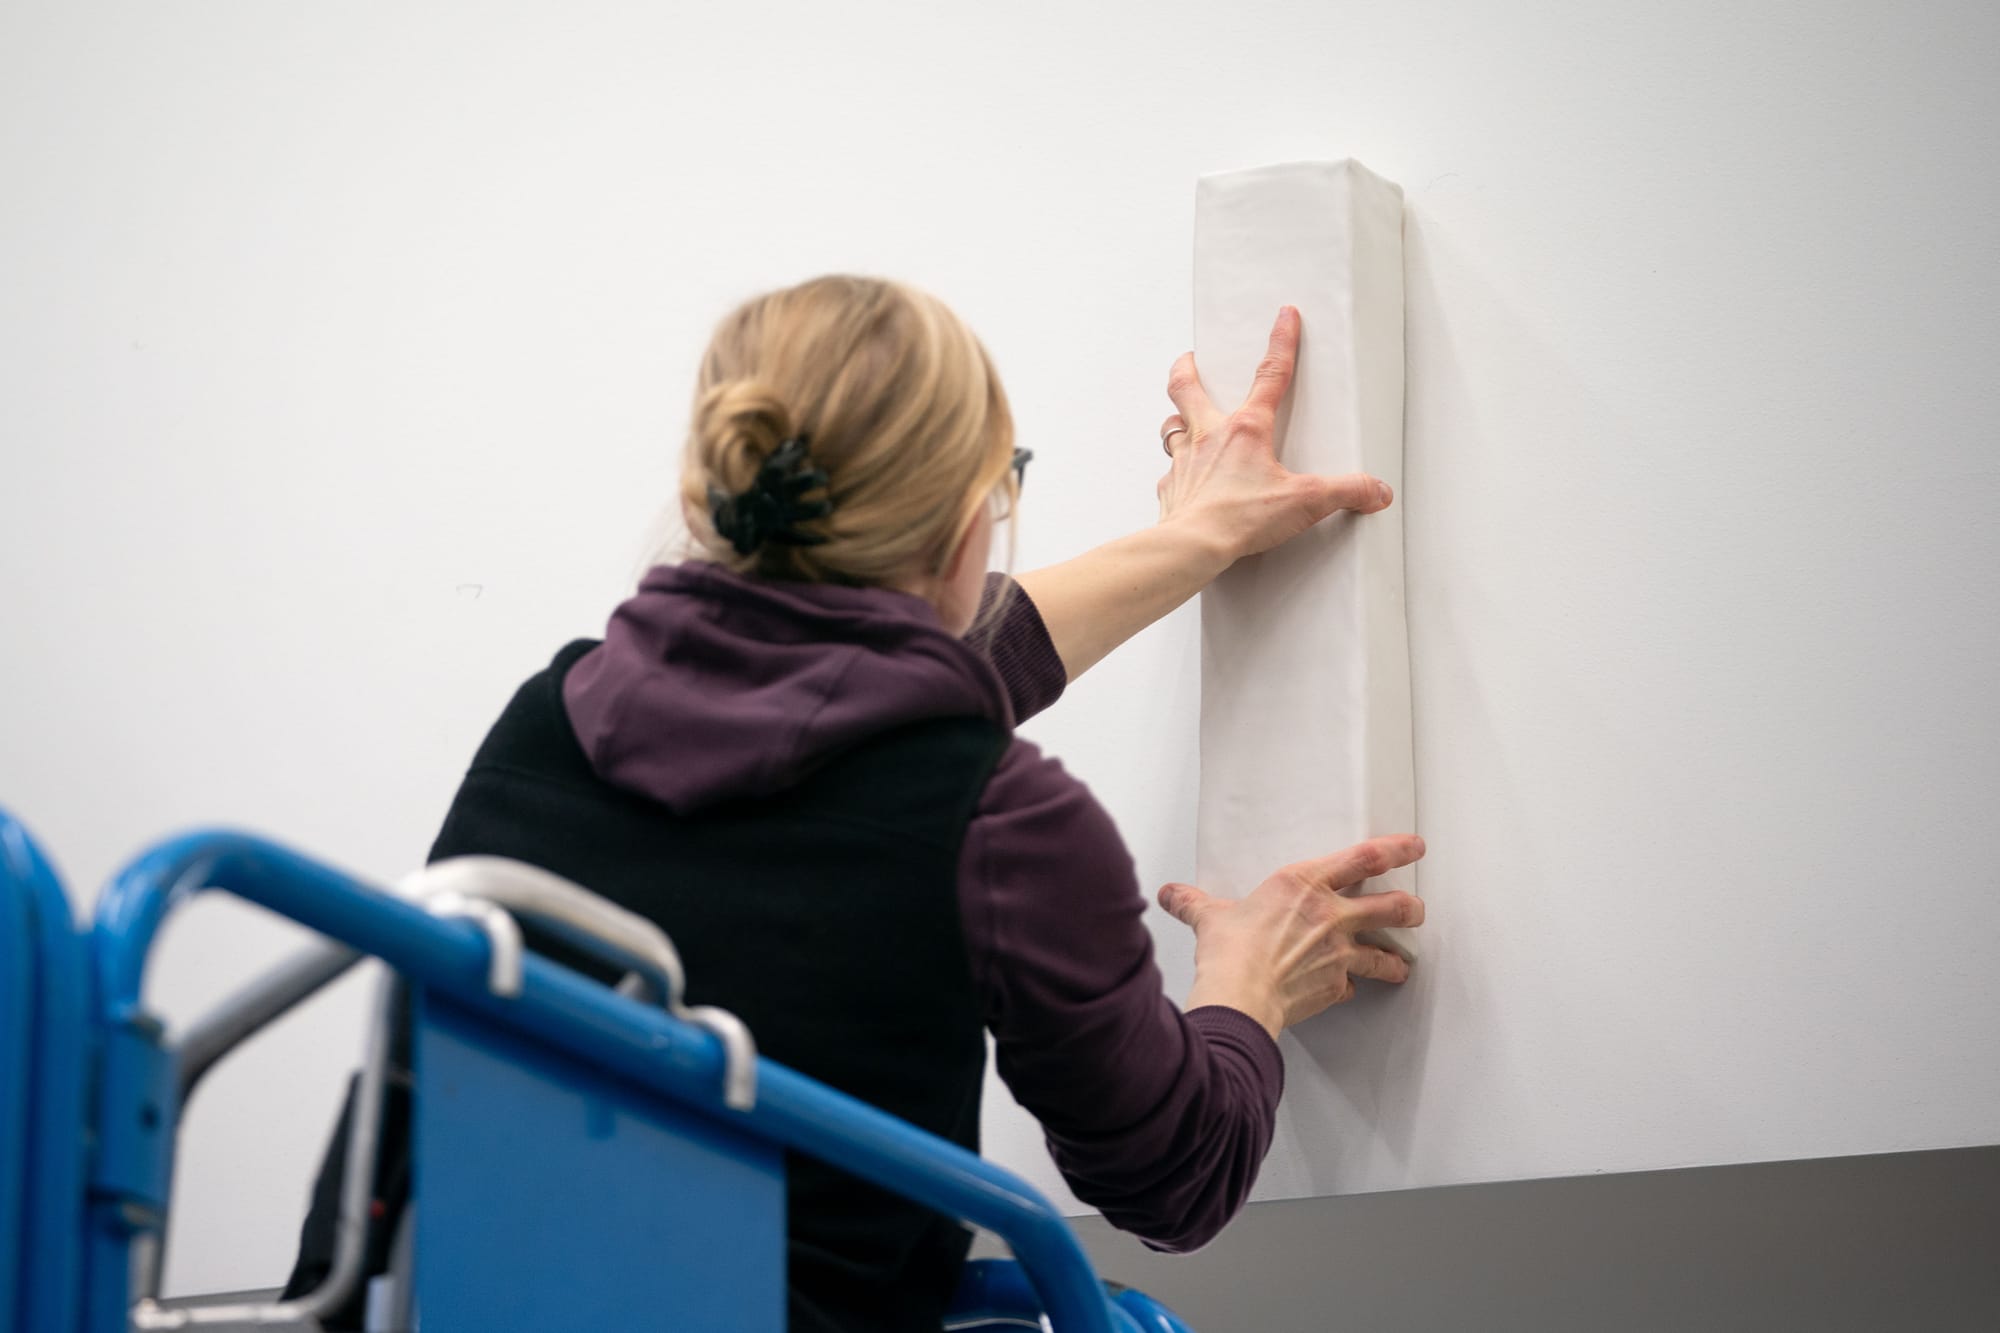 A woman, seen from behind, places a rectangular piece of ceramic pottery on a wall at a high school.